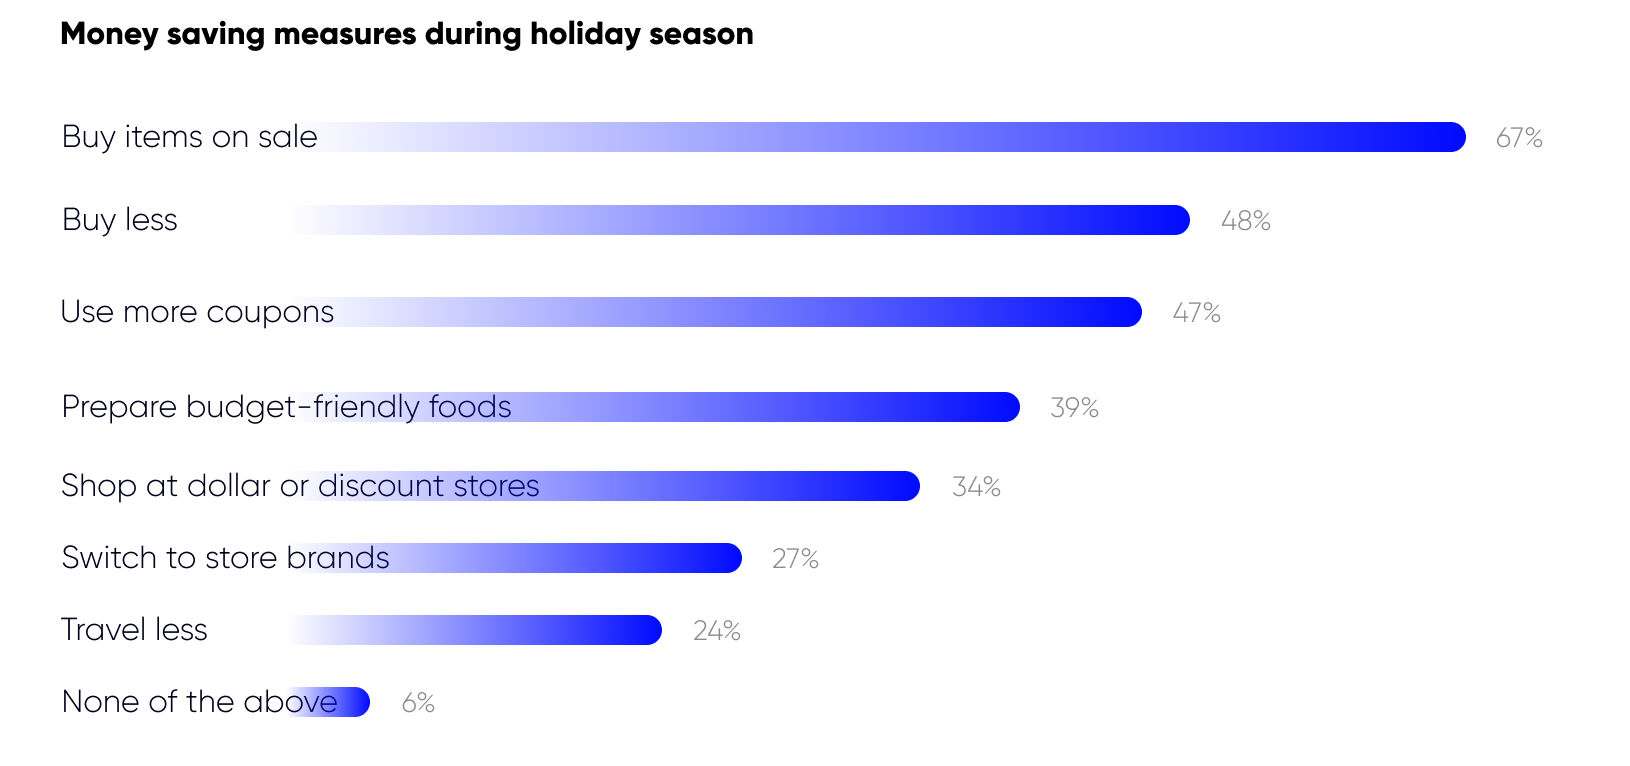 Money saving measures during holiday season. How do users save their money in holidays